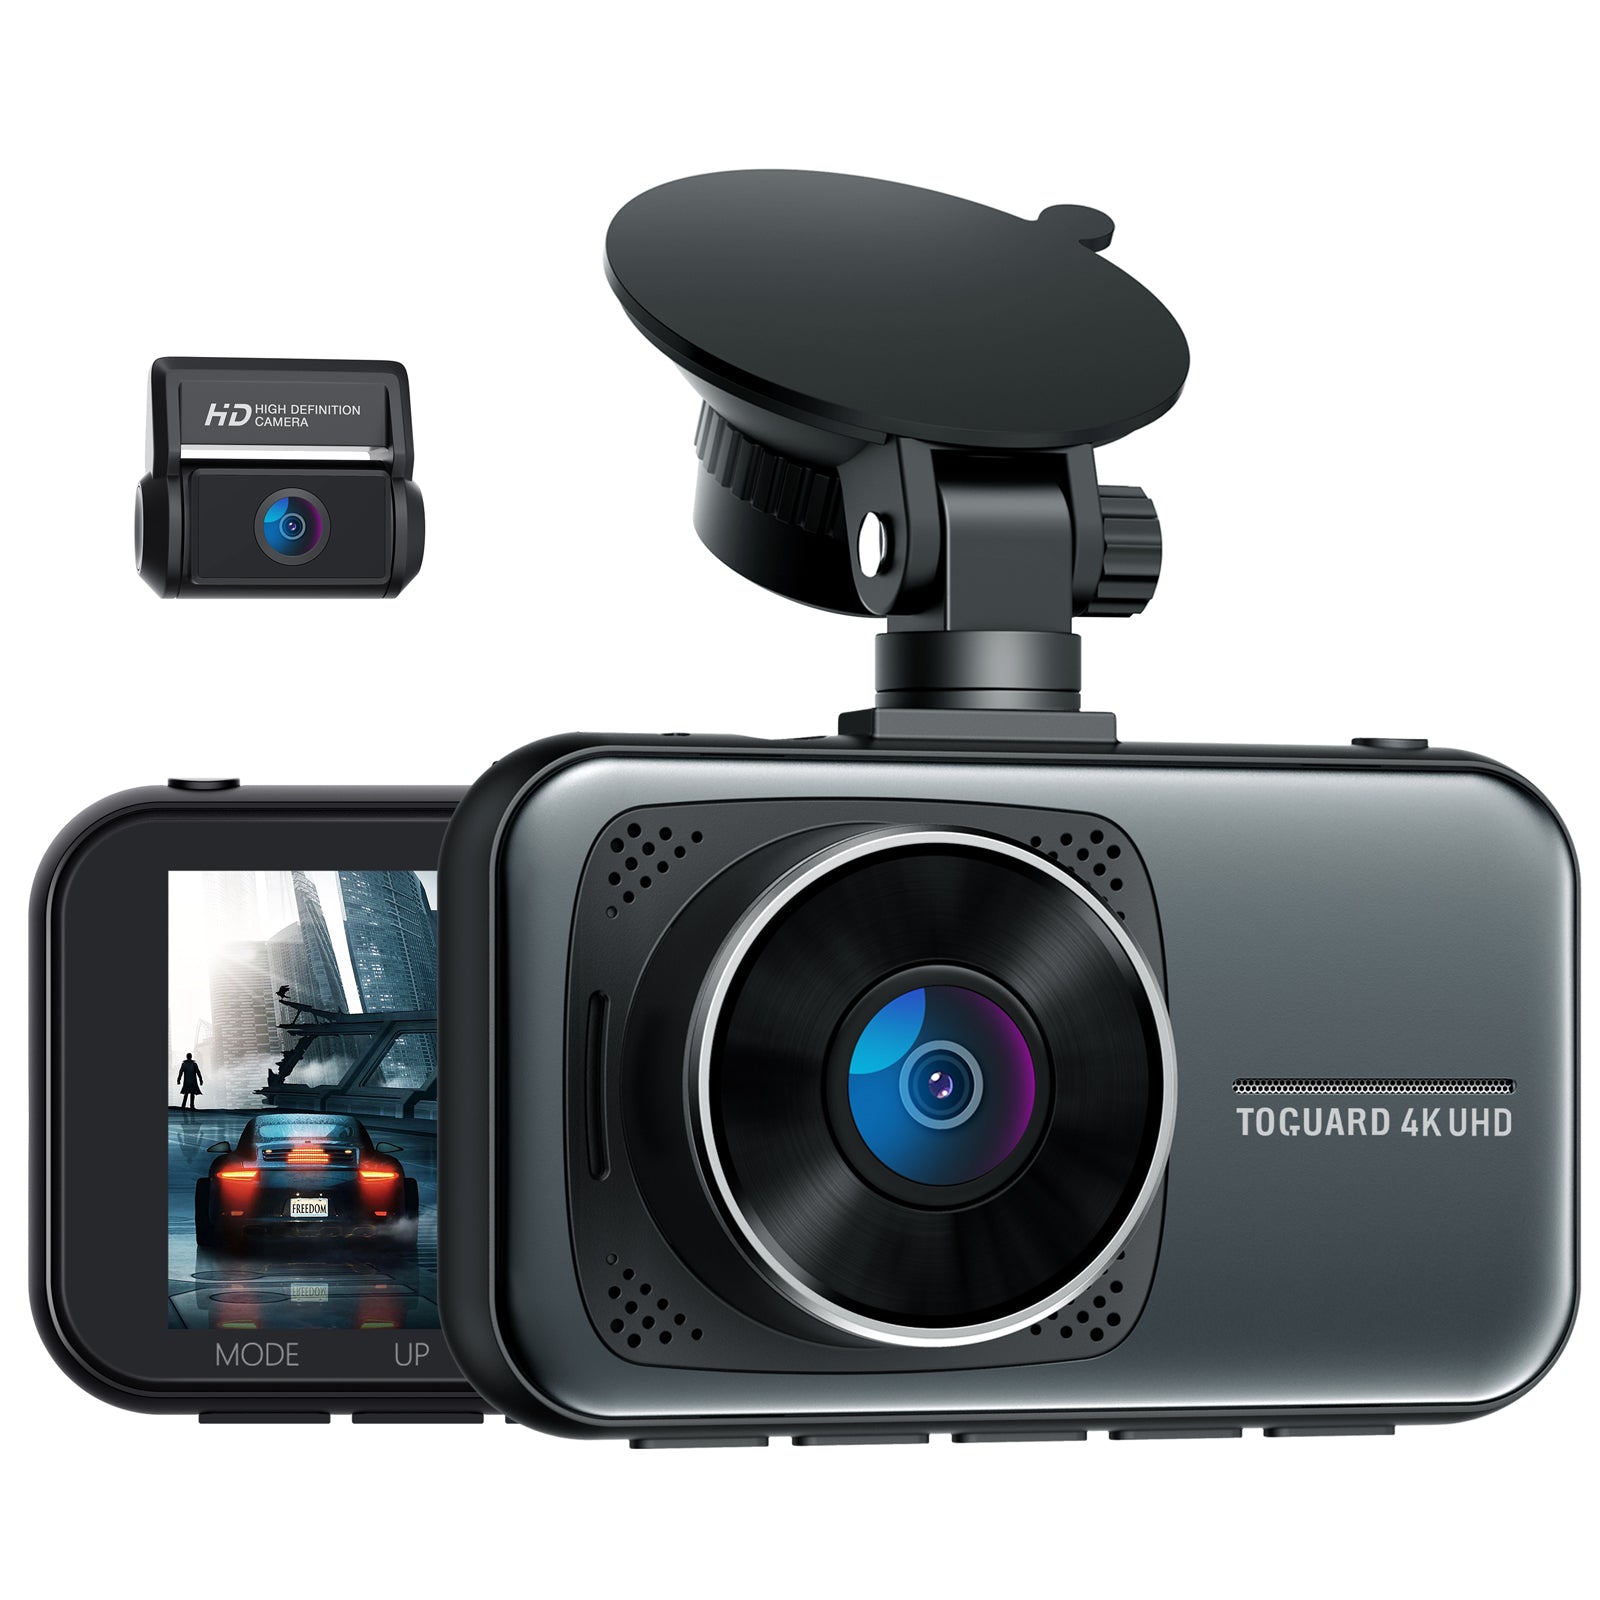 Toguard C200/DC16 4K ,2160P & 1080P Front and Rear Dual Dash Camera 3 inch LCD Display(Only available in Europe)